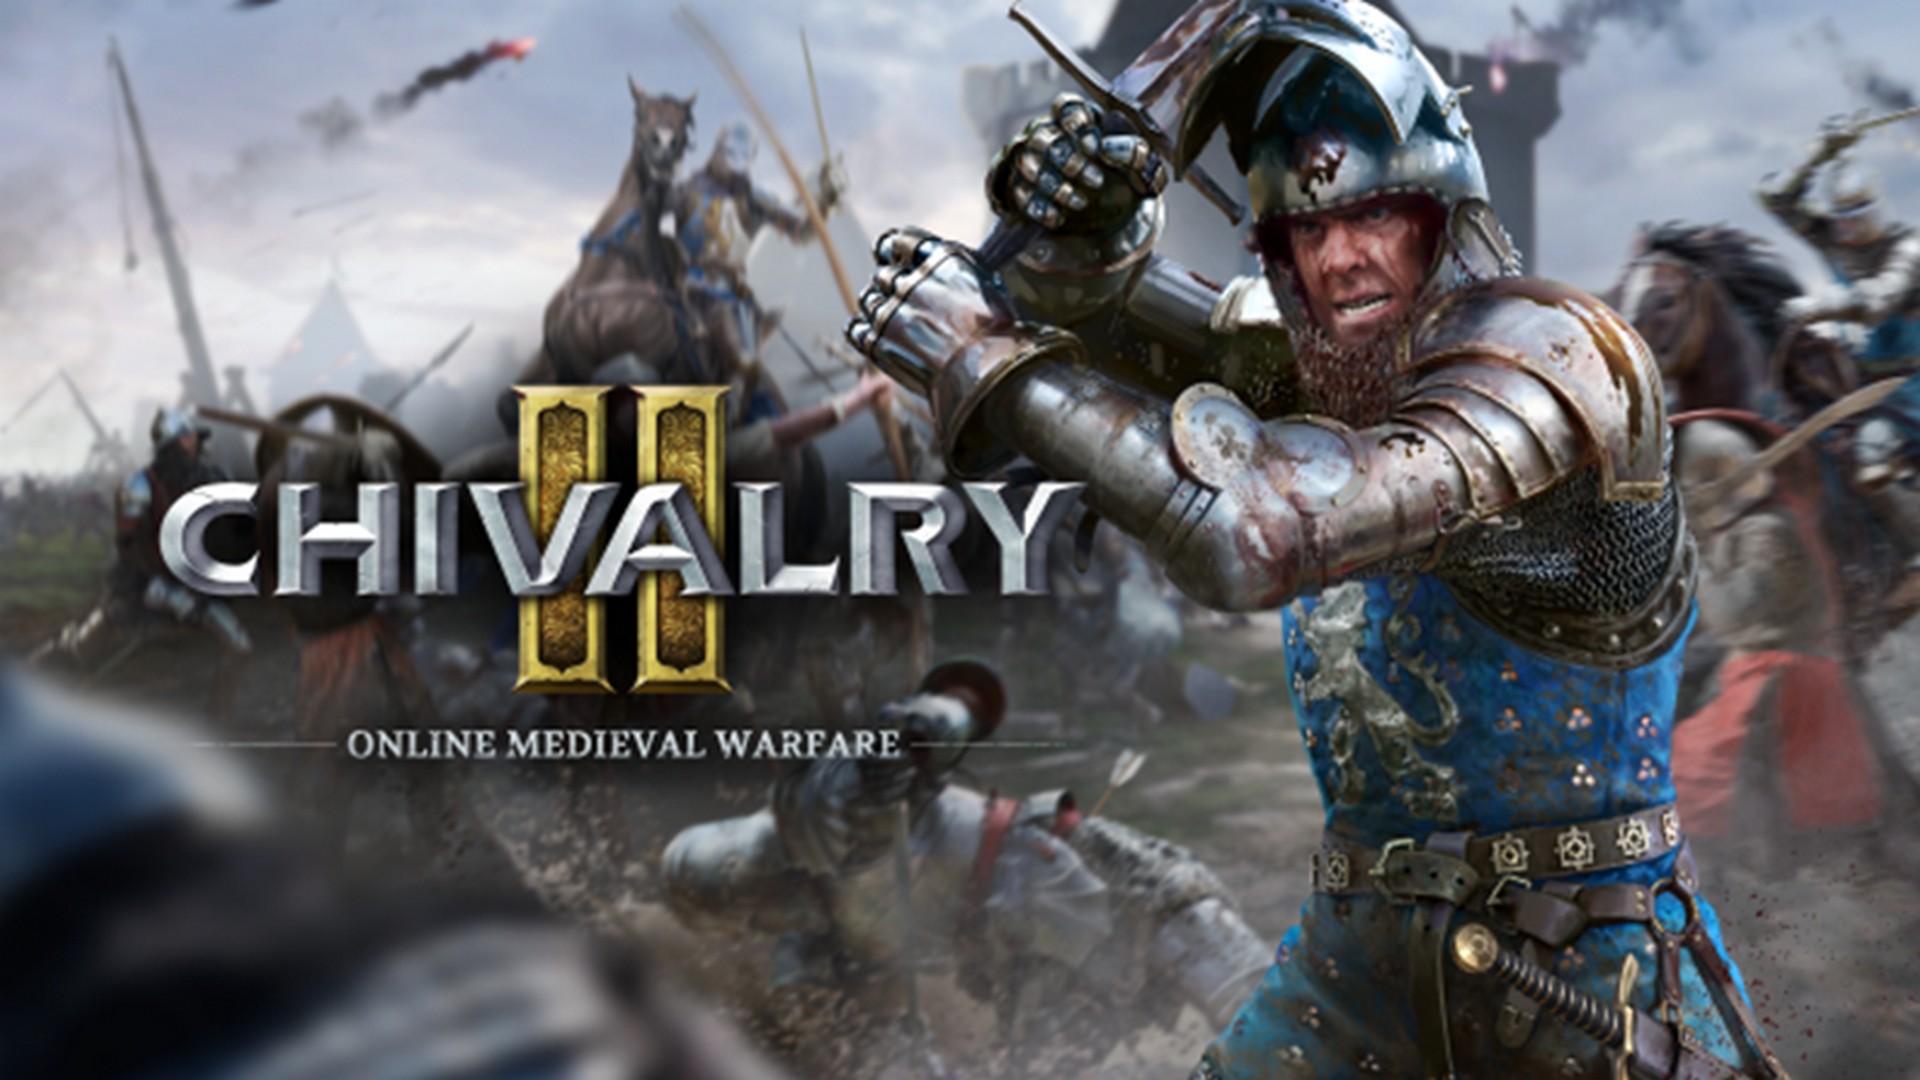 Watch The Chivalry 2 Launch Trailer & Pre-Download Ahead of Global Launch for PC, PlayStation 4, PlayStation 5, Xbox One, and Xbox Series X|S